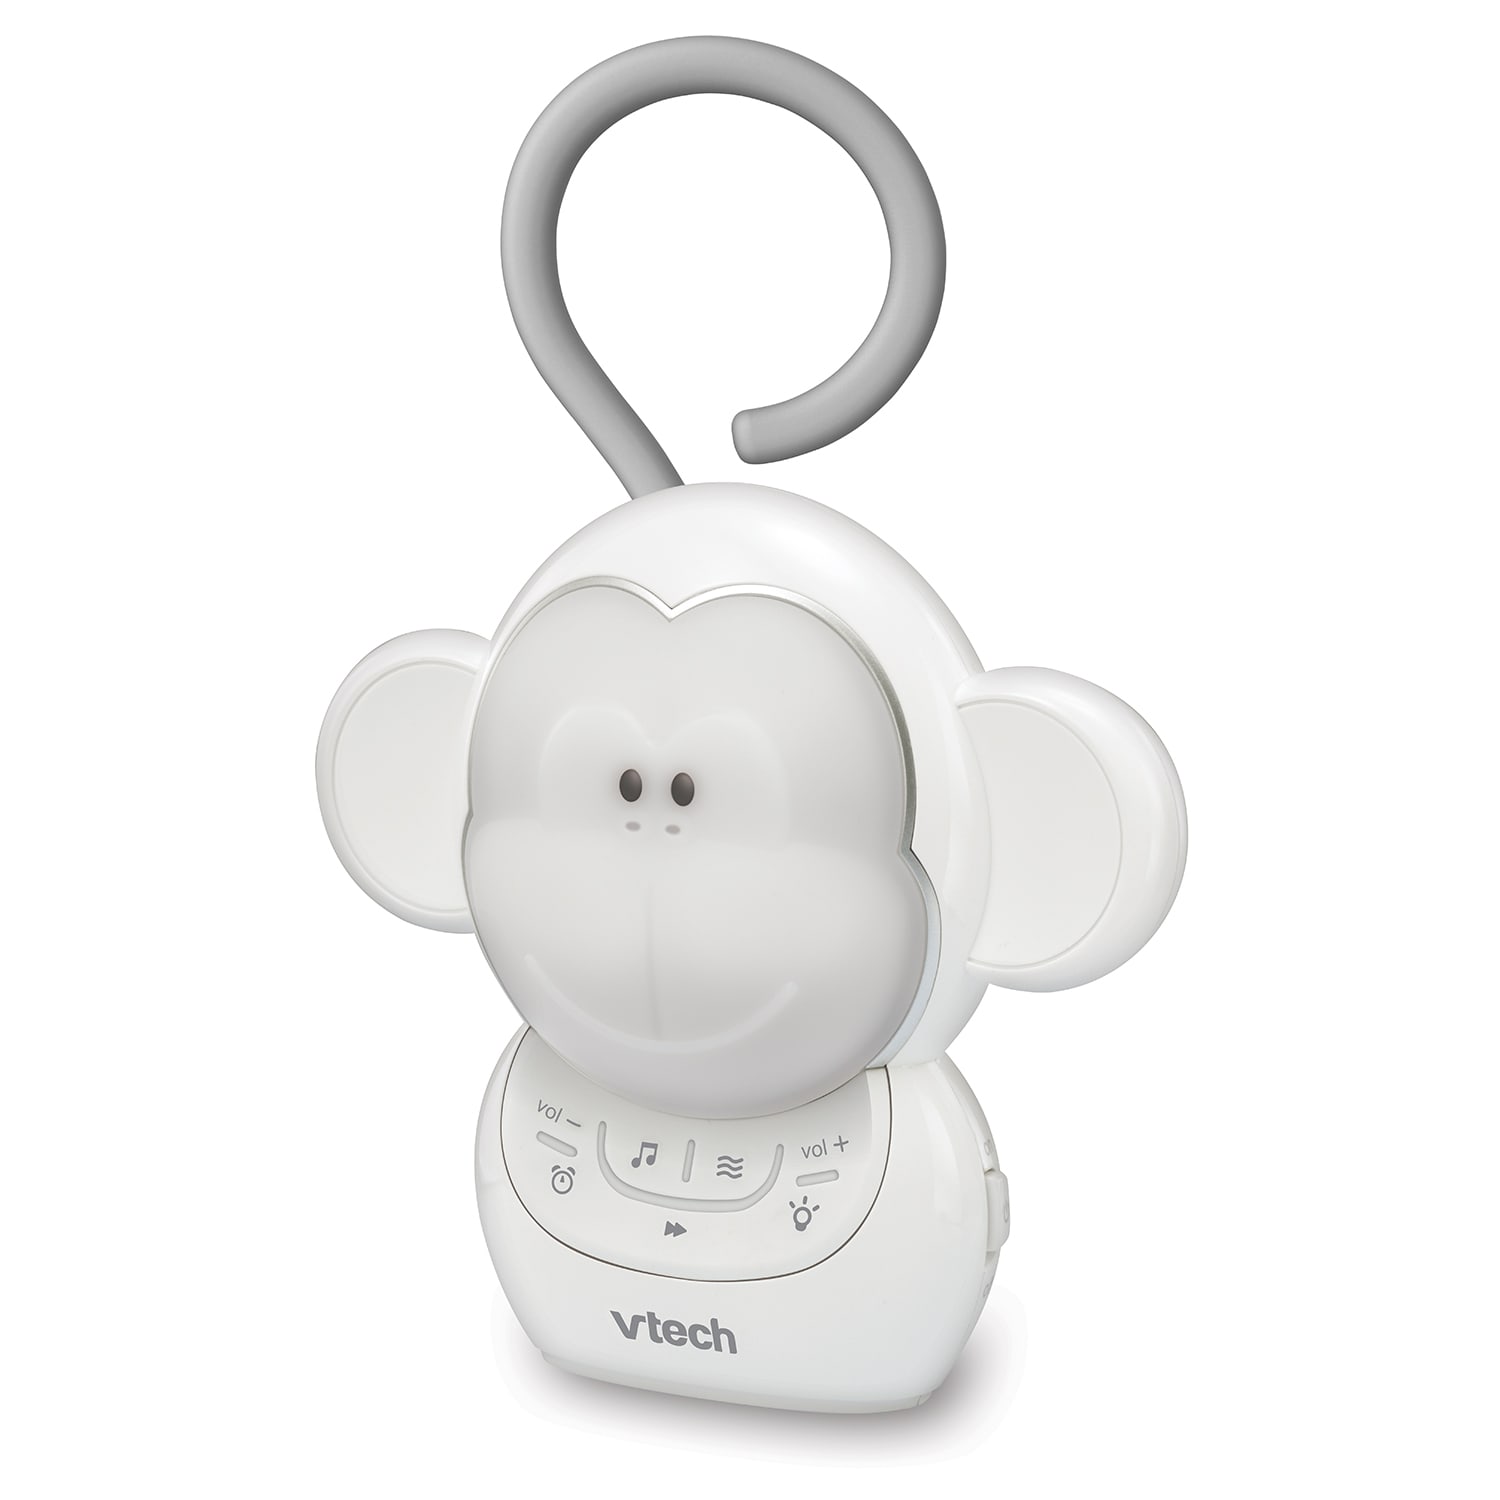 Myla the Monkey® Portable Soother - view 4